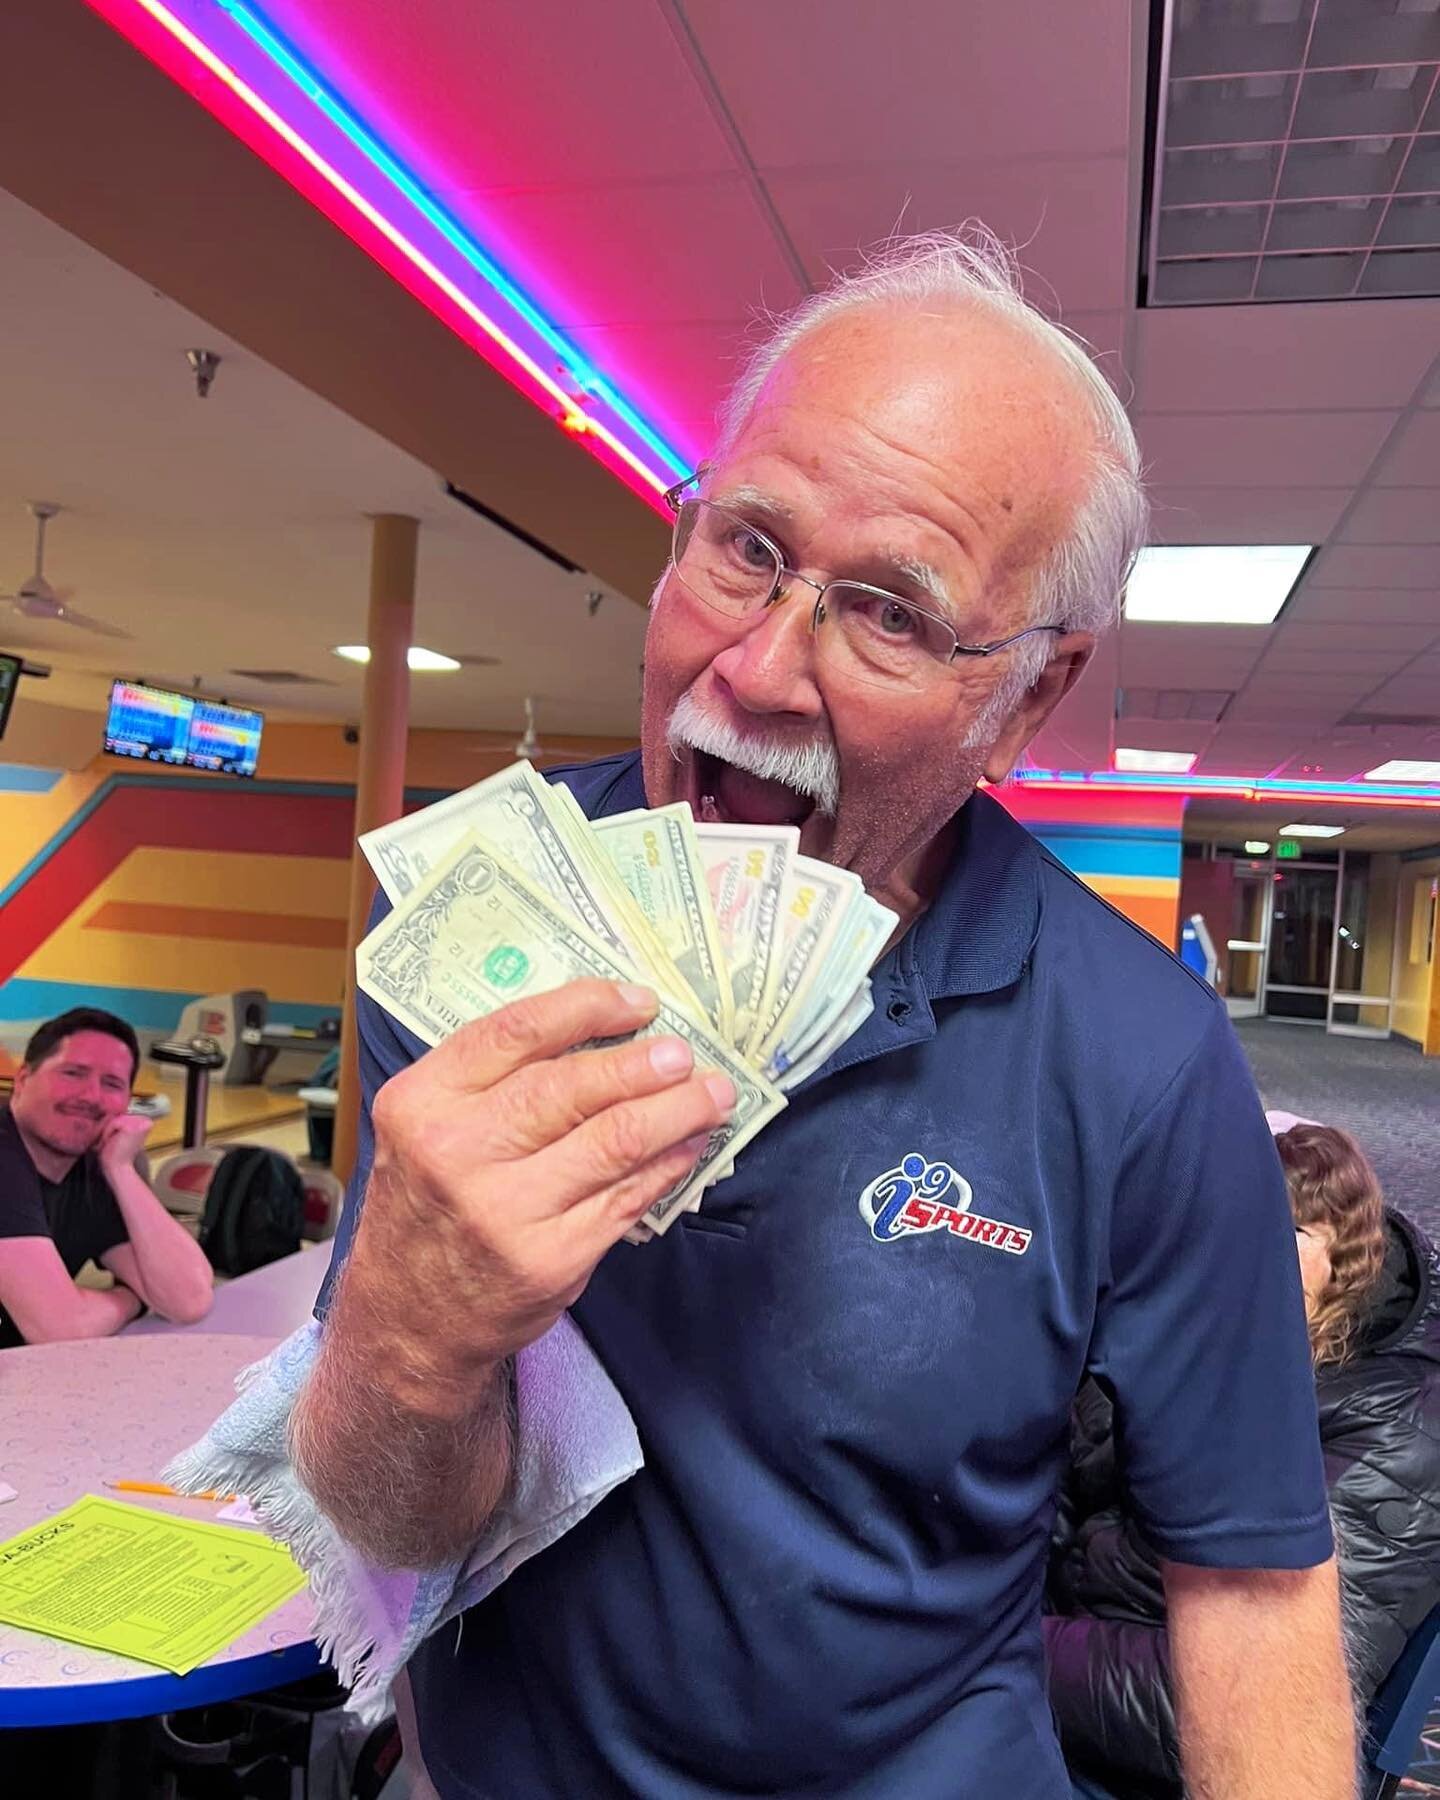 Bob Jones won $1,266 from Strike-a-Fortune presented by Hammer in Harley&rsquo;s Scratch Classic at our Simi Bowl location! Congrats Bob! 🎳🔥